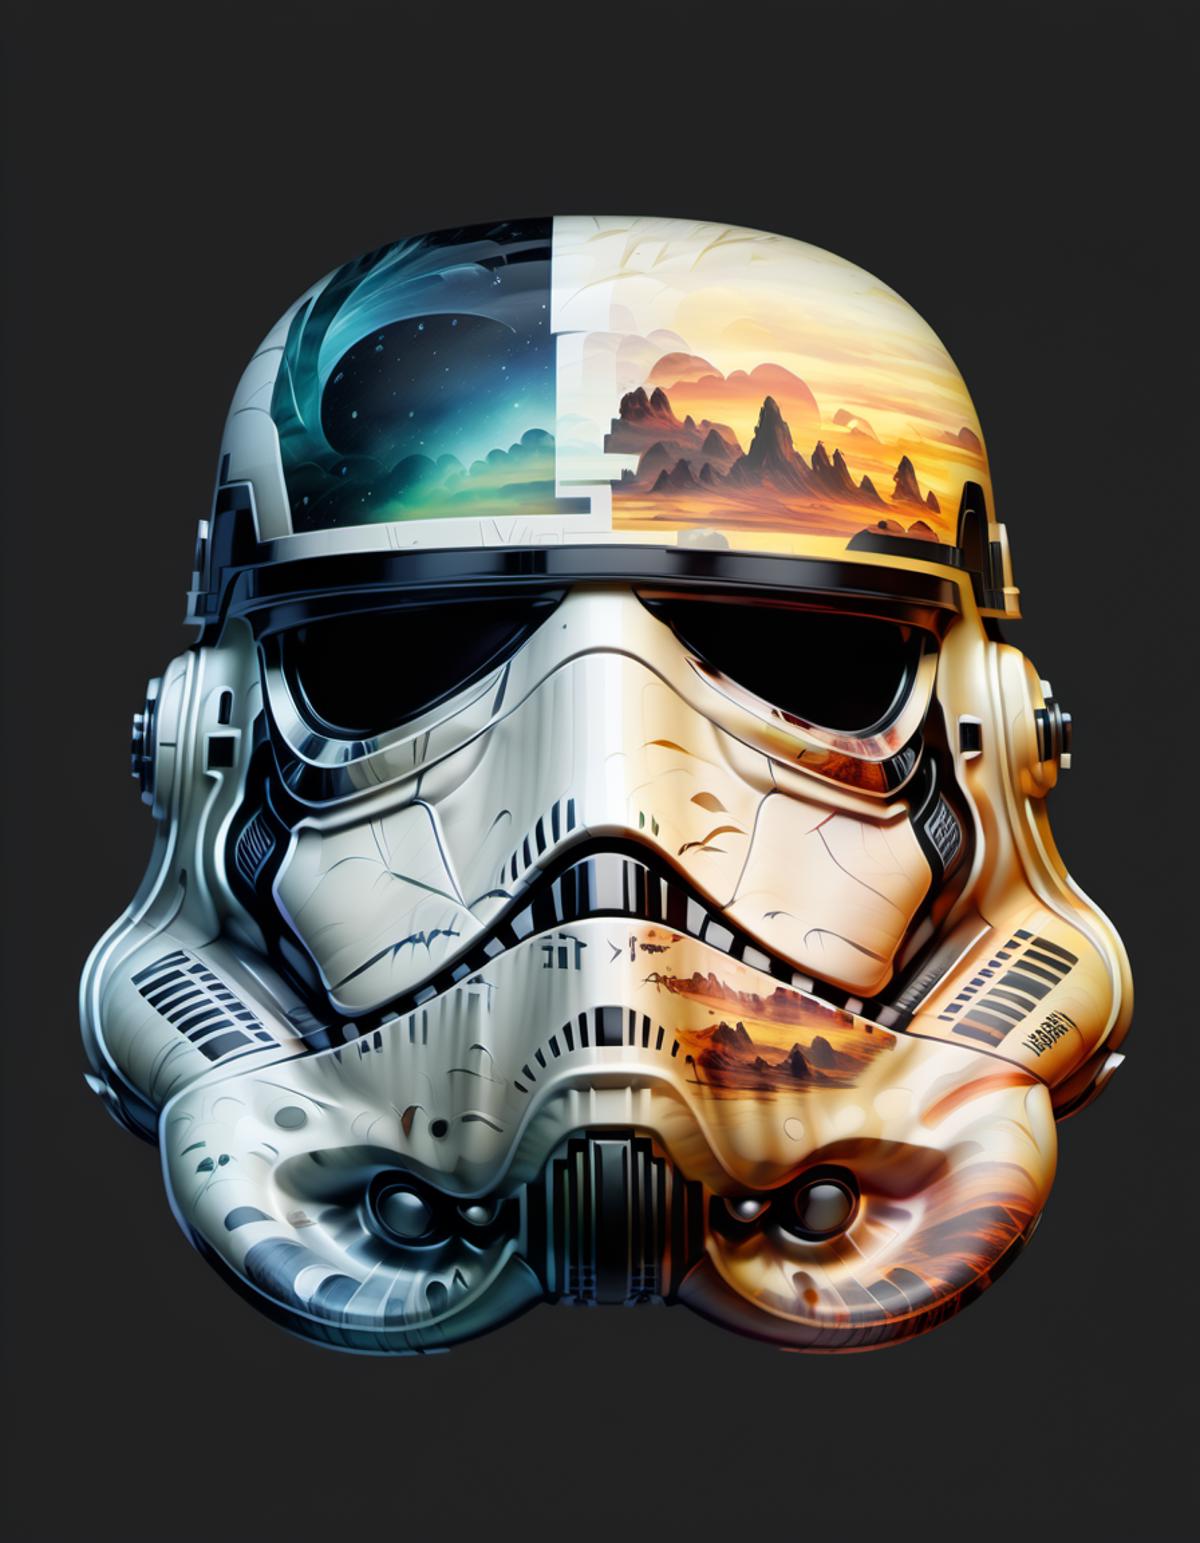 The face of a stormtrooper from Star Wars, with a colorful background.